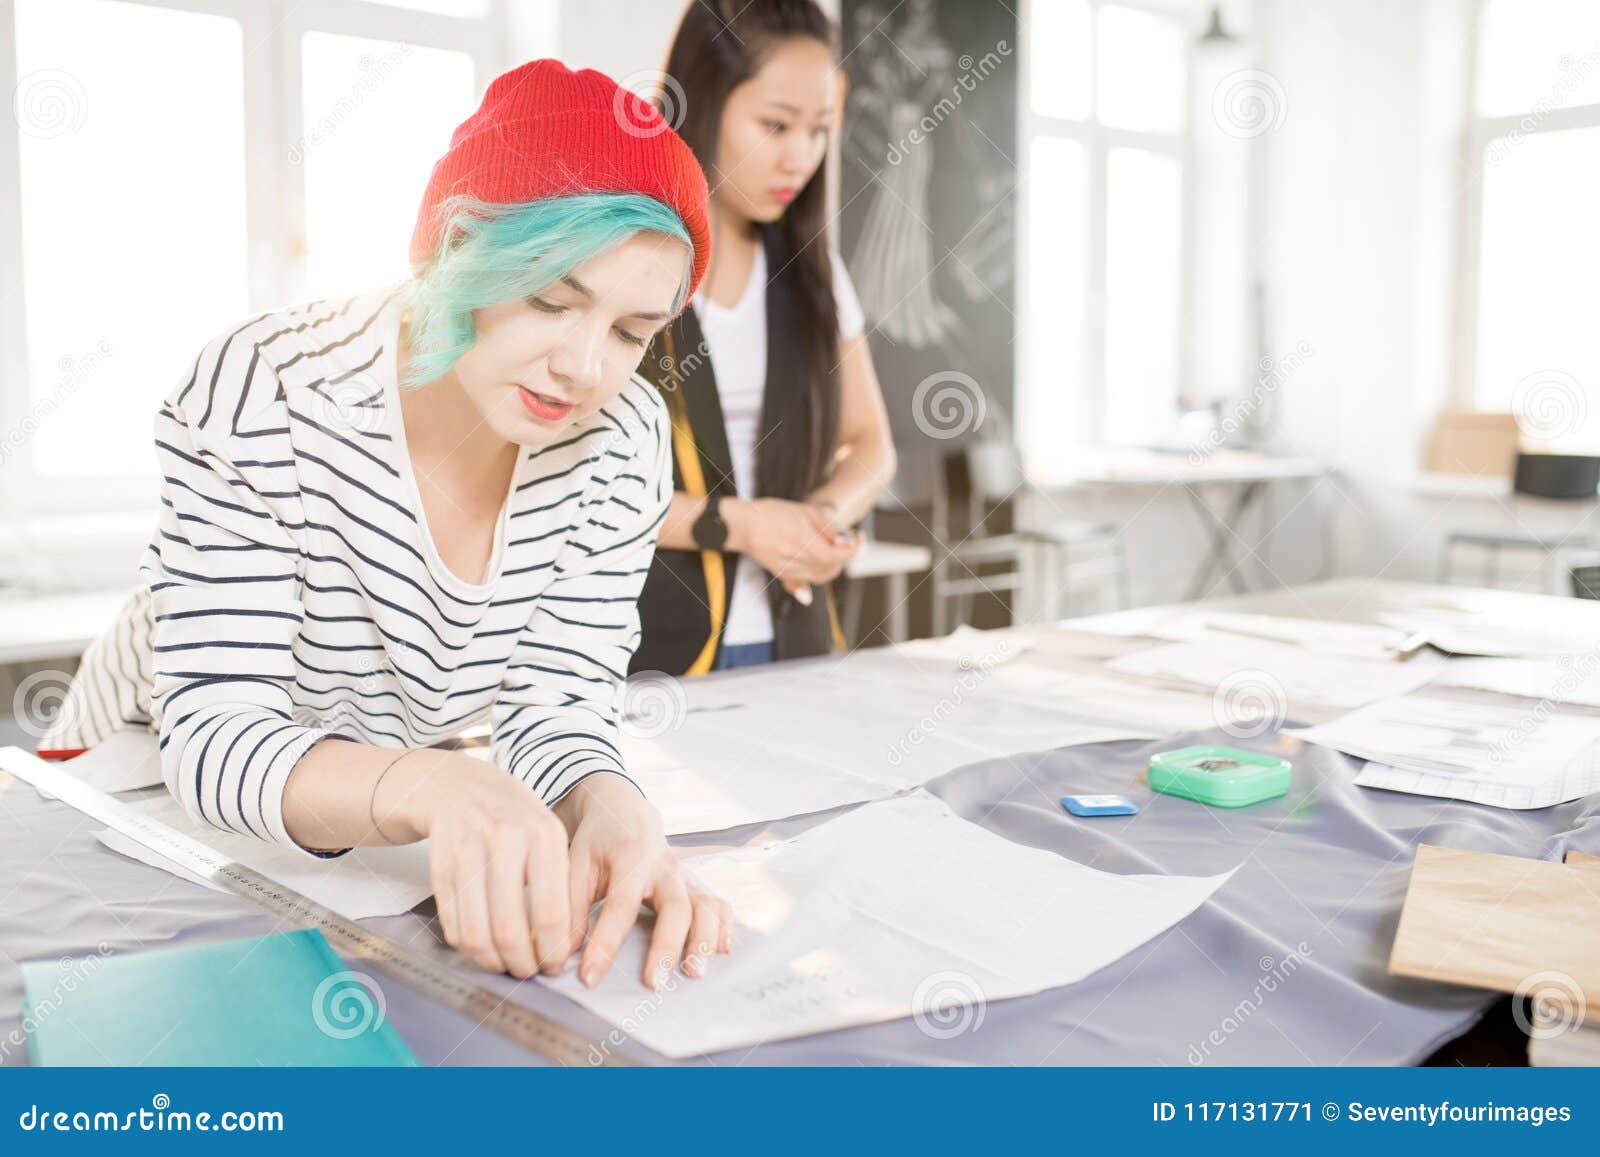 Two Tailors Working in Atelier Workshop Stock Image - Image of artist ...